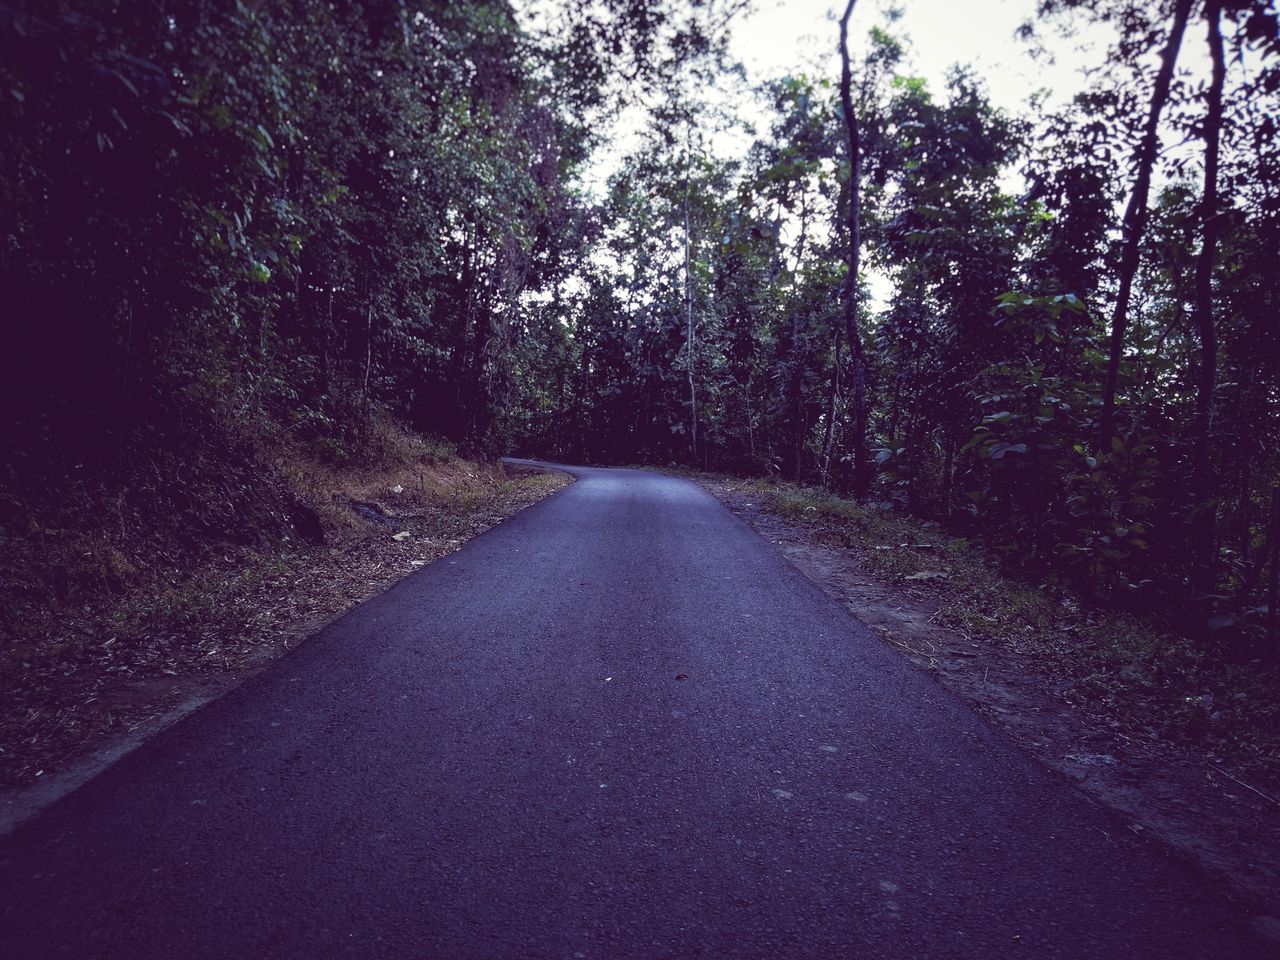 ROAD IN FOREST